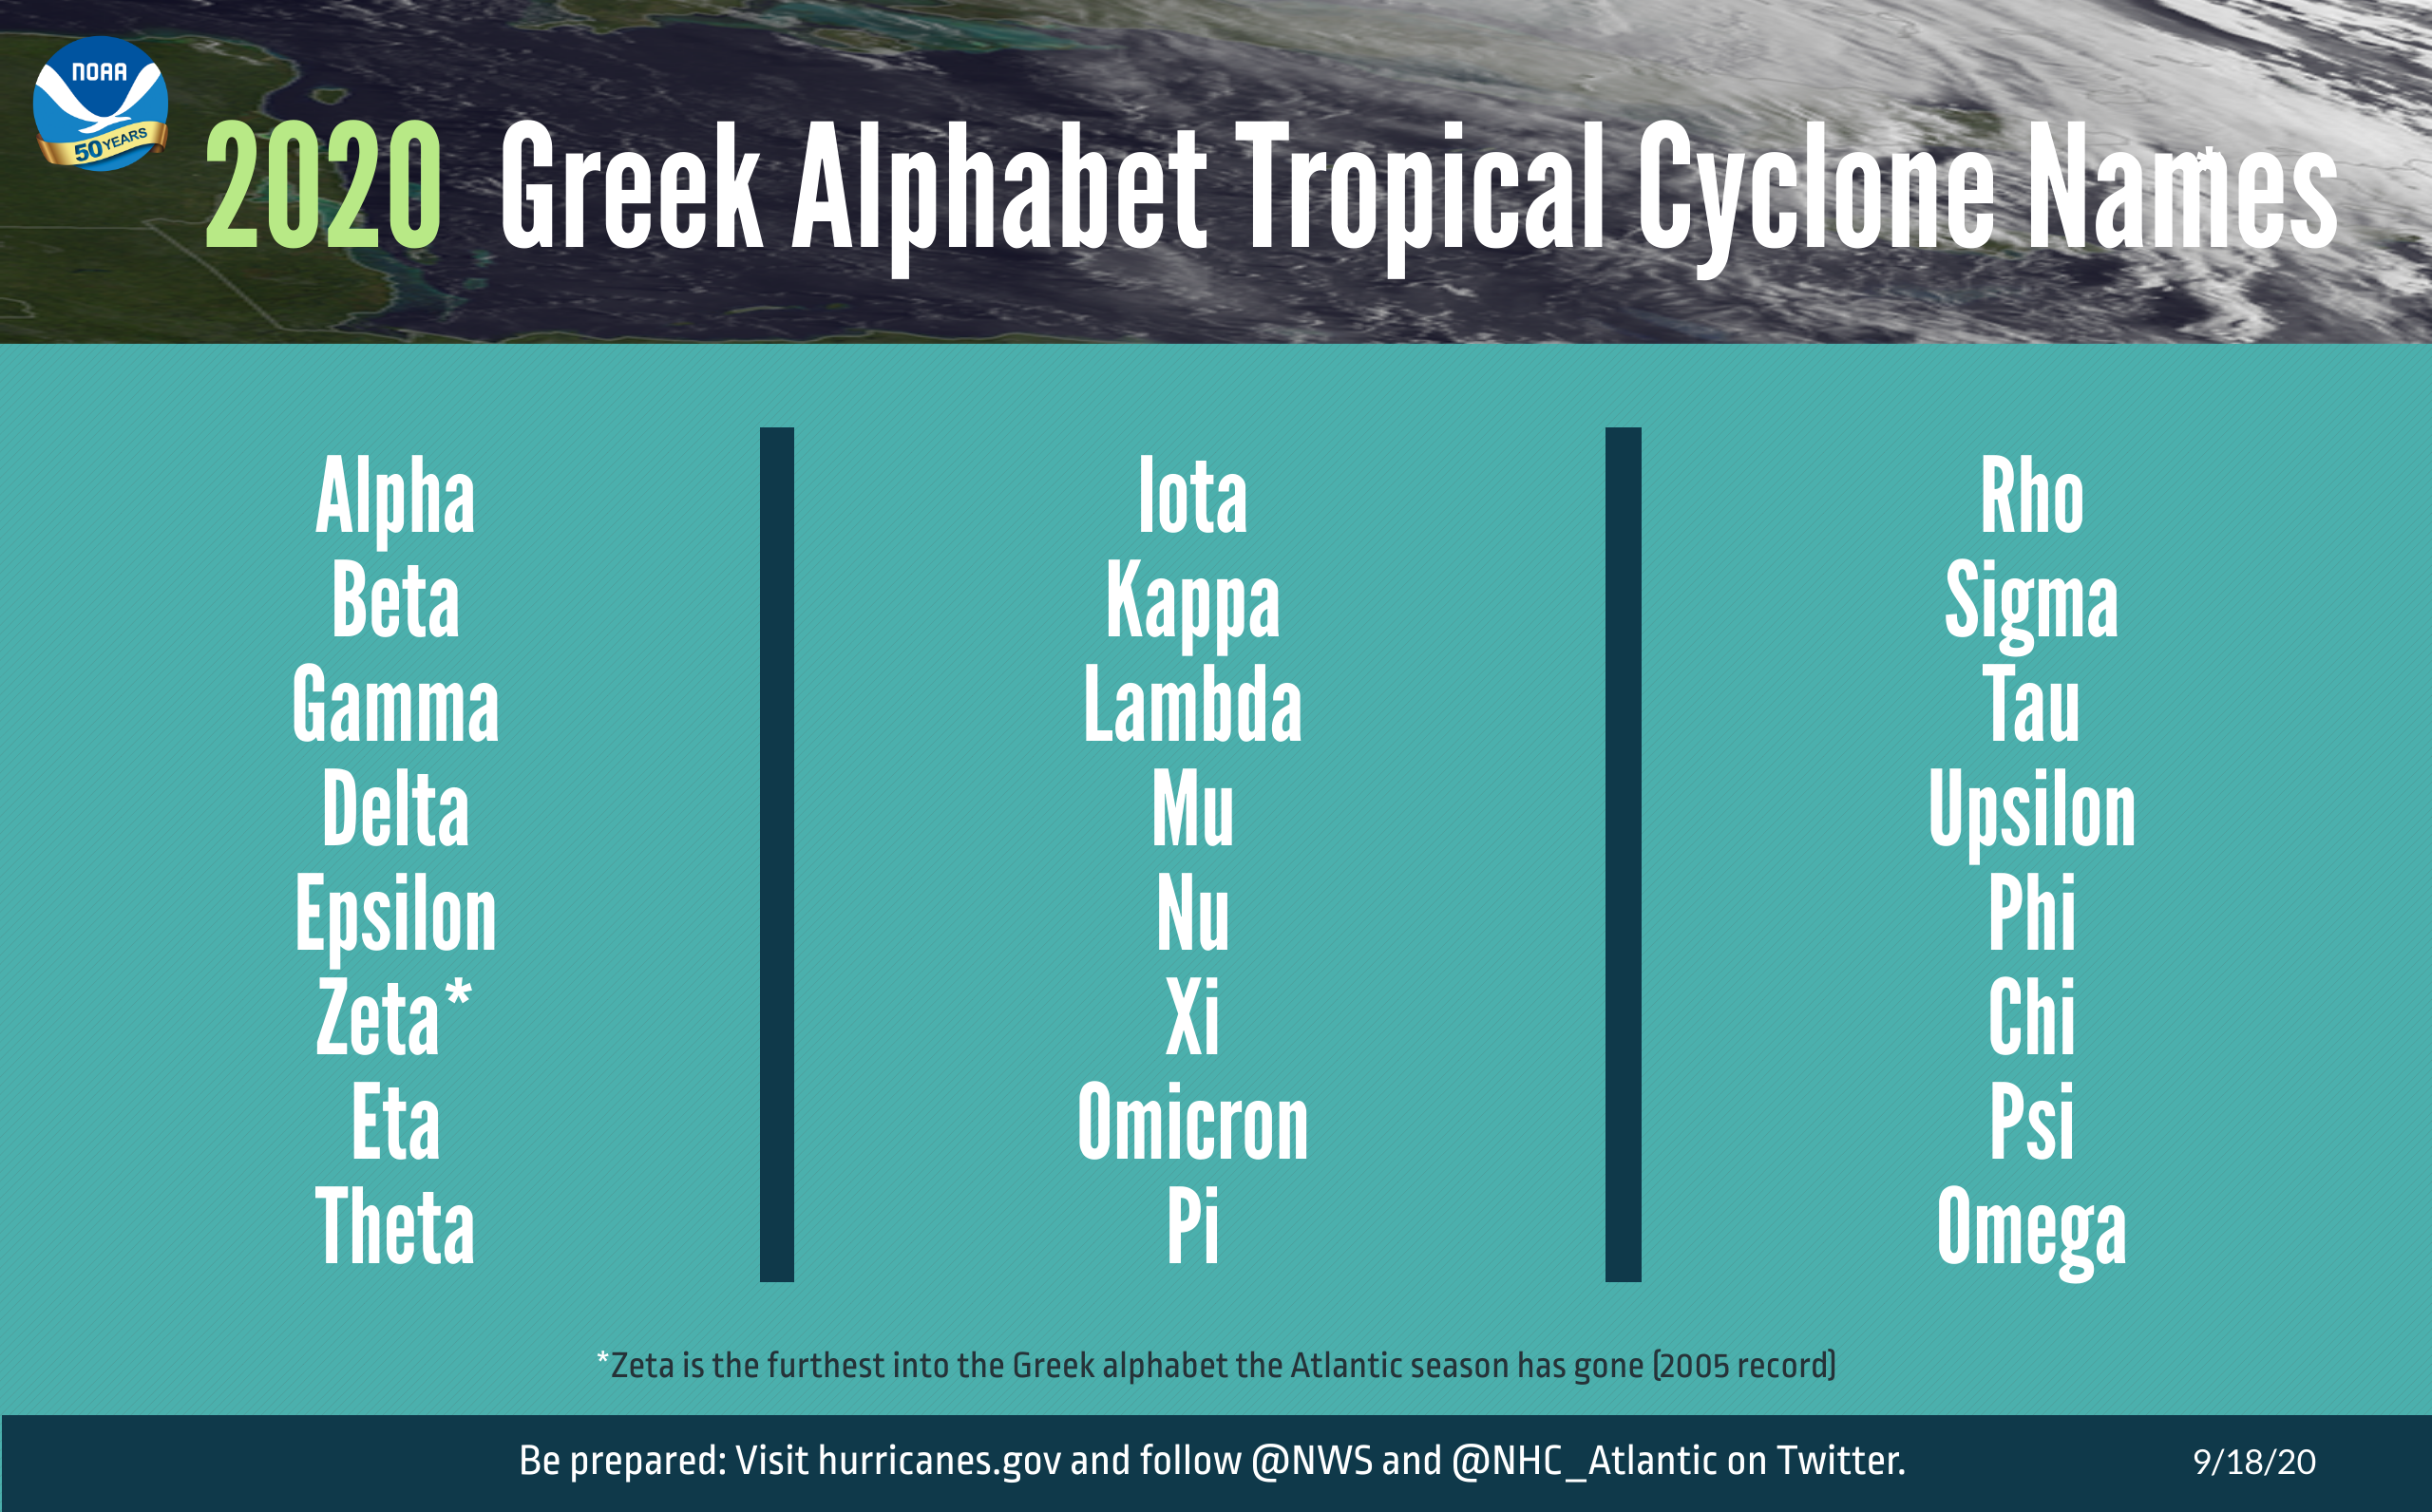 The Greek alphabet is being used to name Atlantic tropical storms now that the regular list of 21 names ended with Tropical Storm Wilfred. Subtropical storm Alpha received its Greek letter name on September 18, 2020.